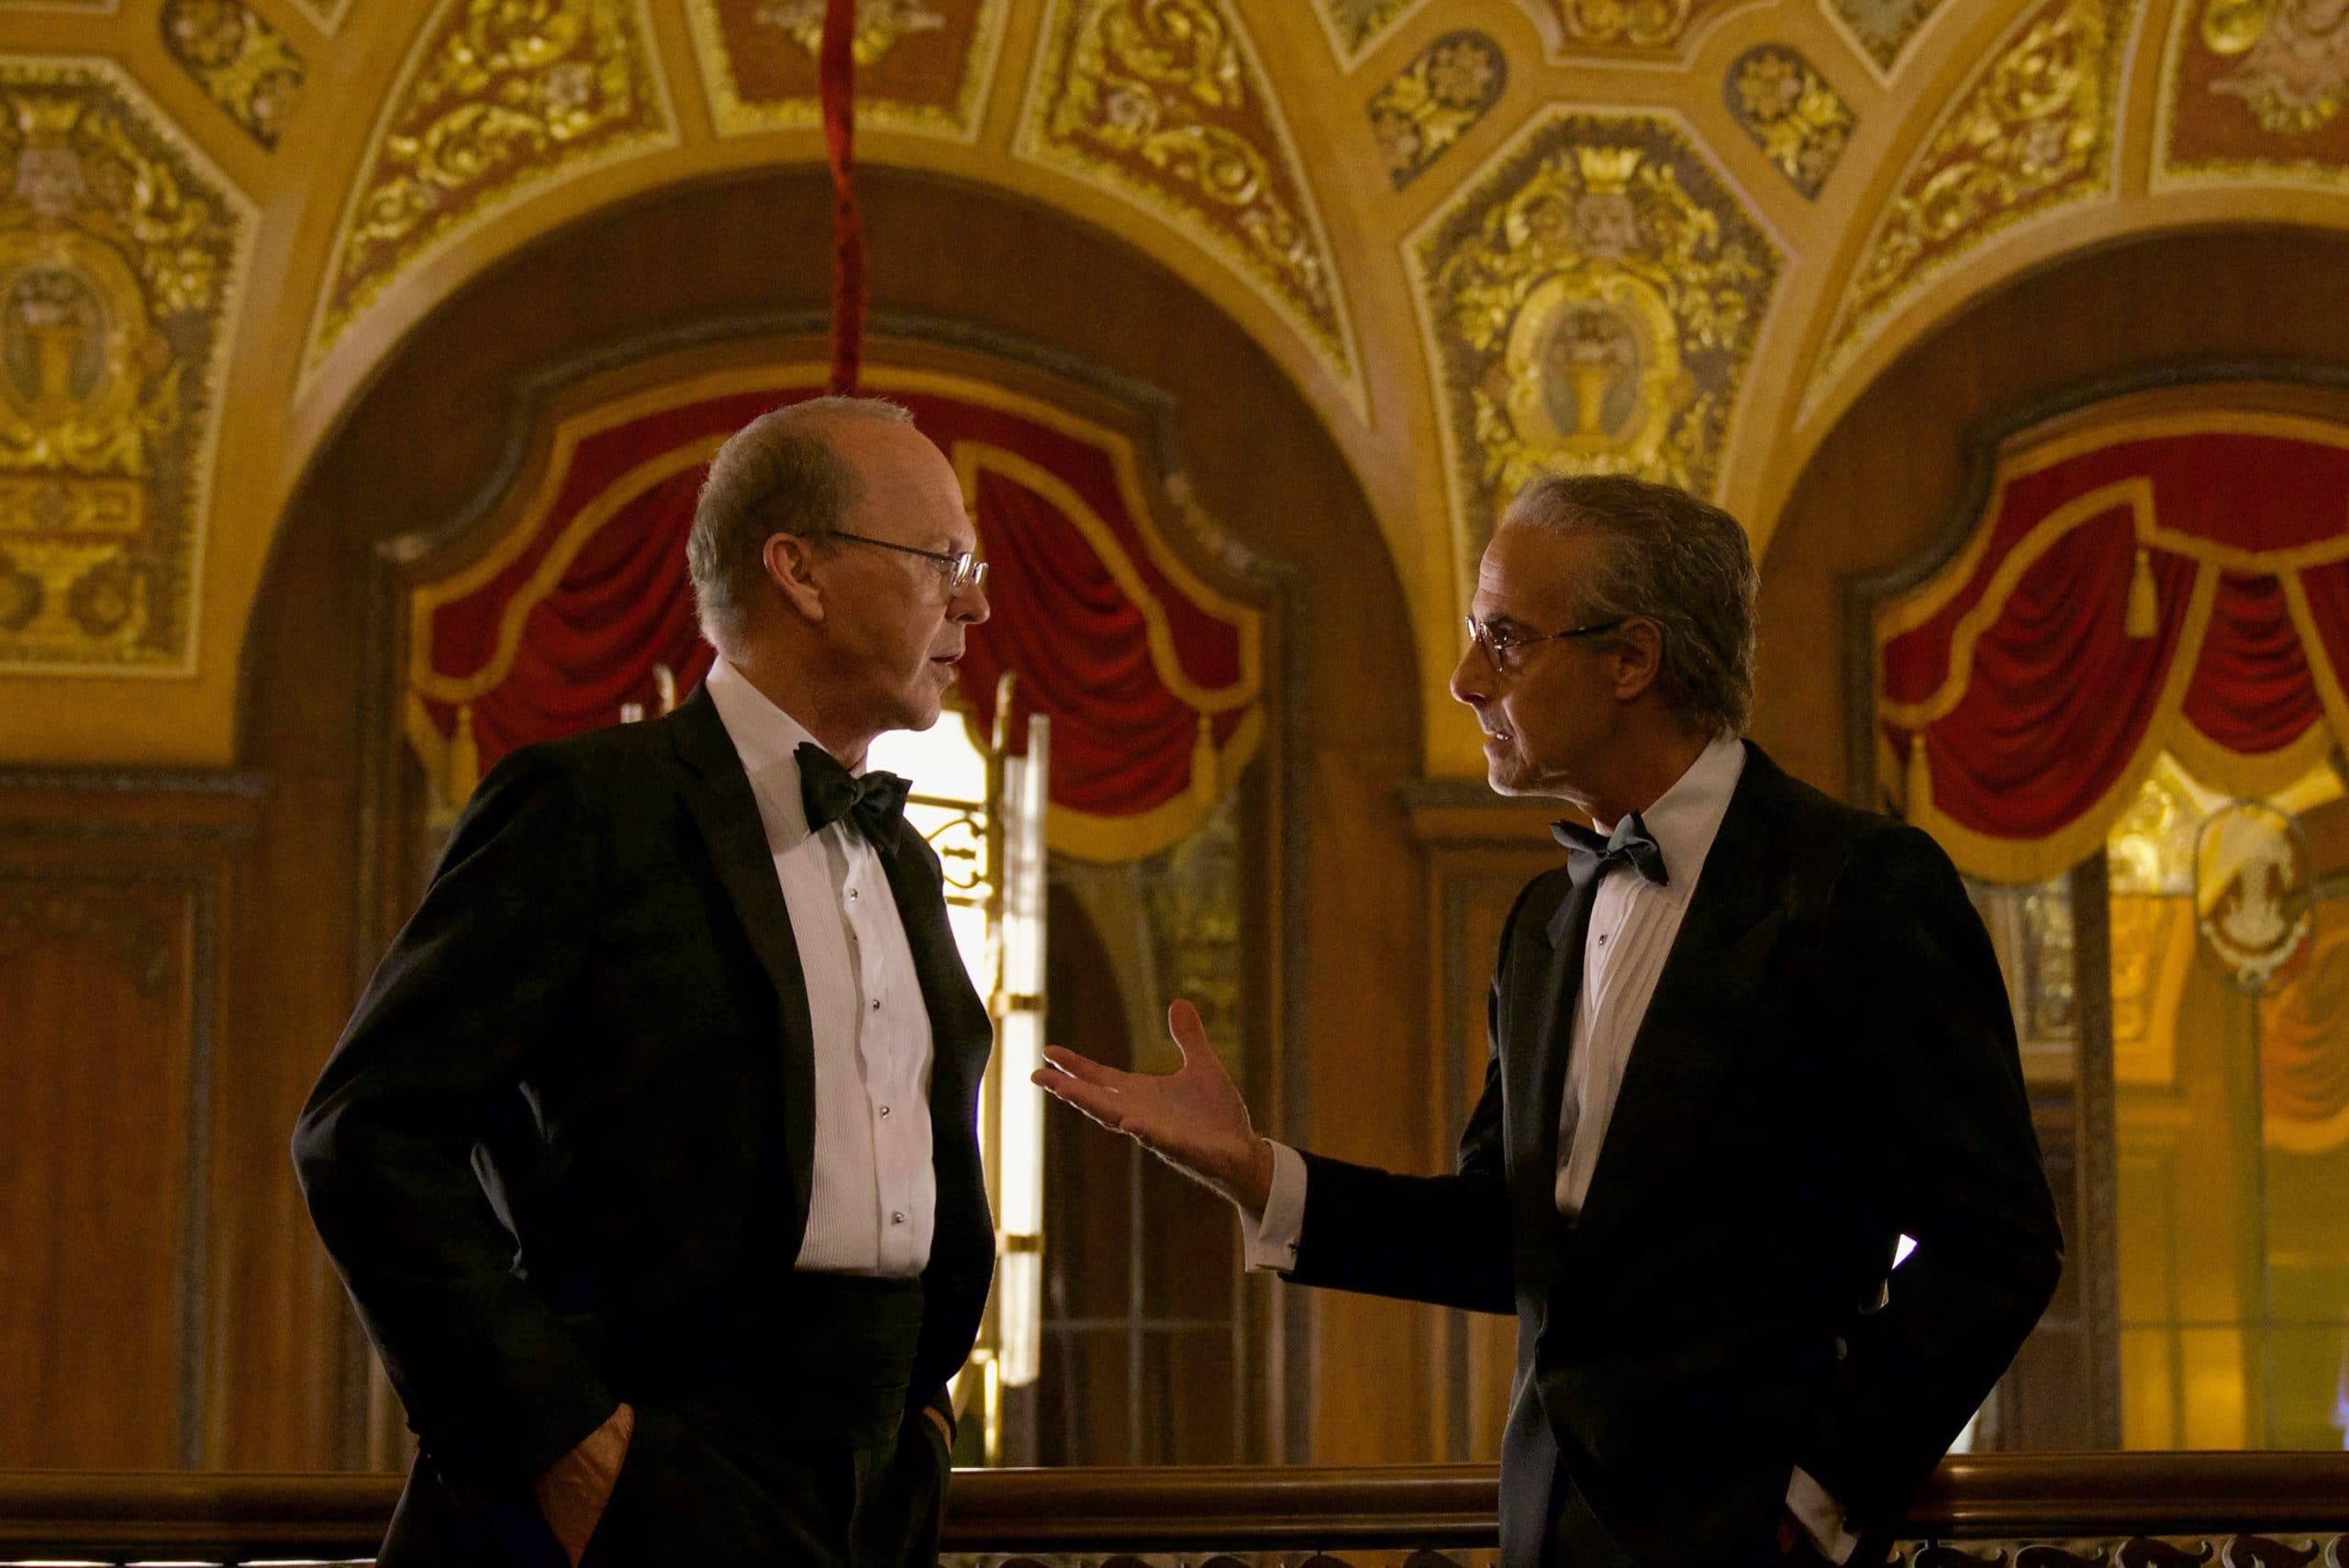 WORTH, (aka WHAT IS LIFE WORTH), from left: Michael Keaton, Stanley Tucci, 2020